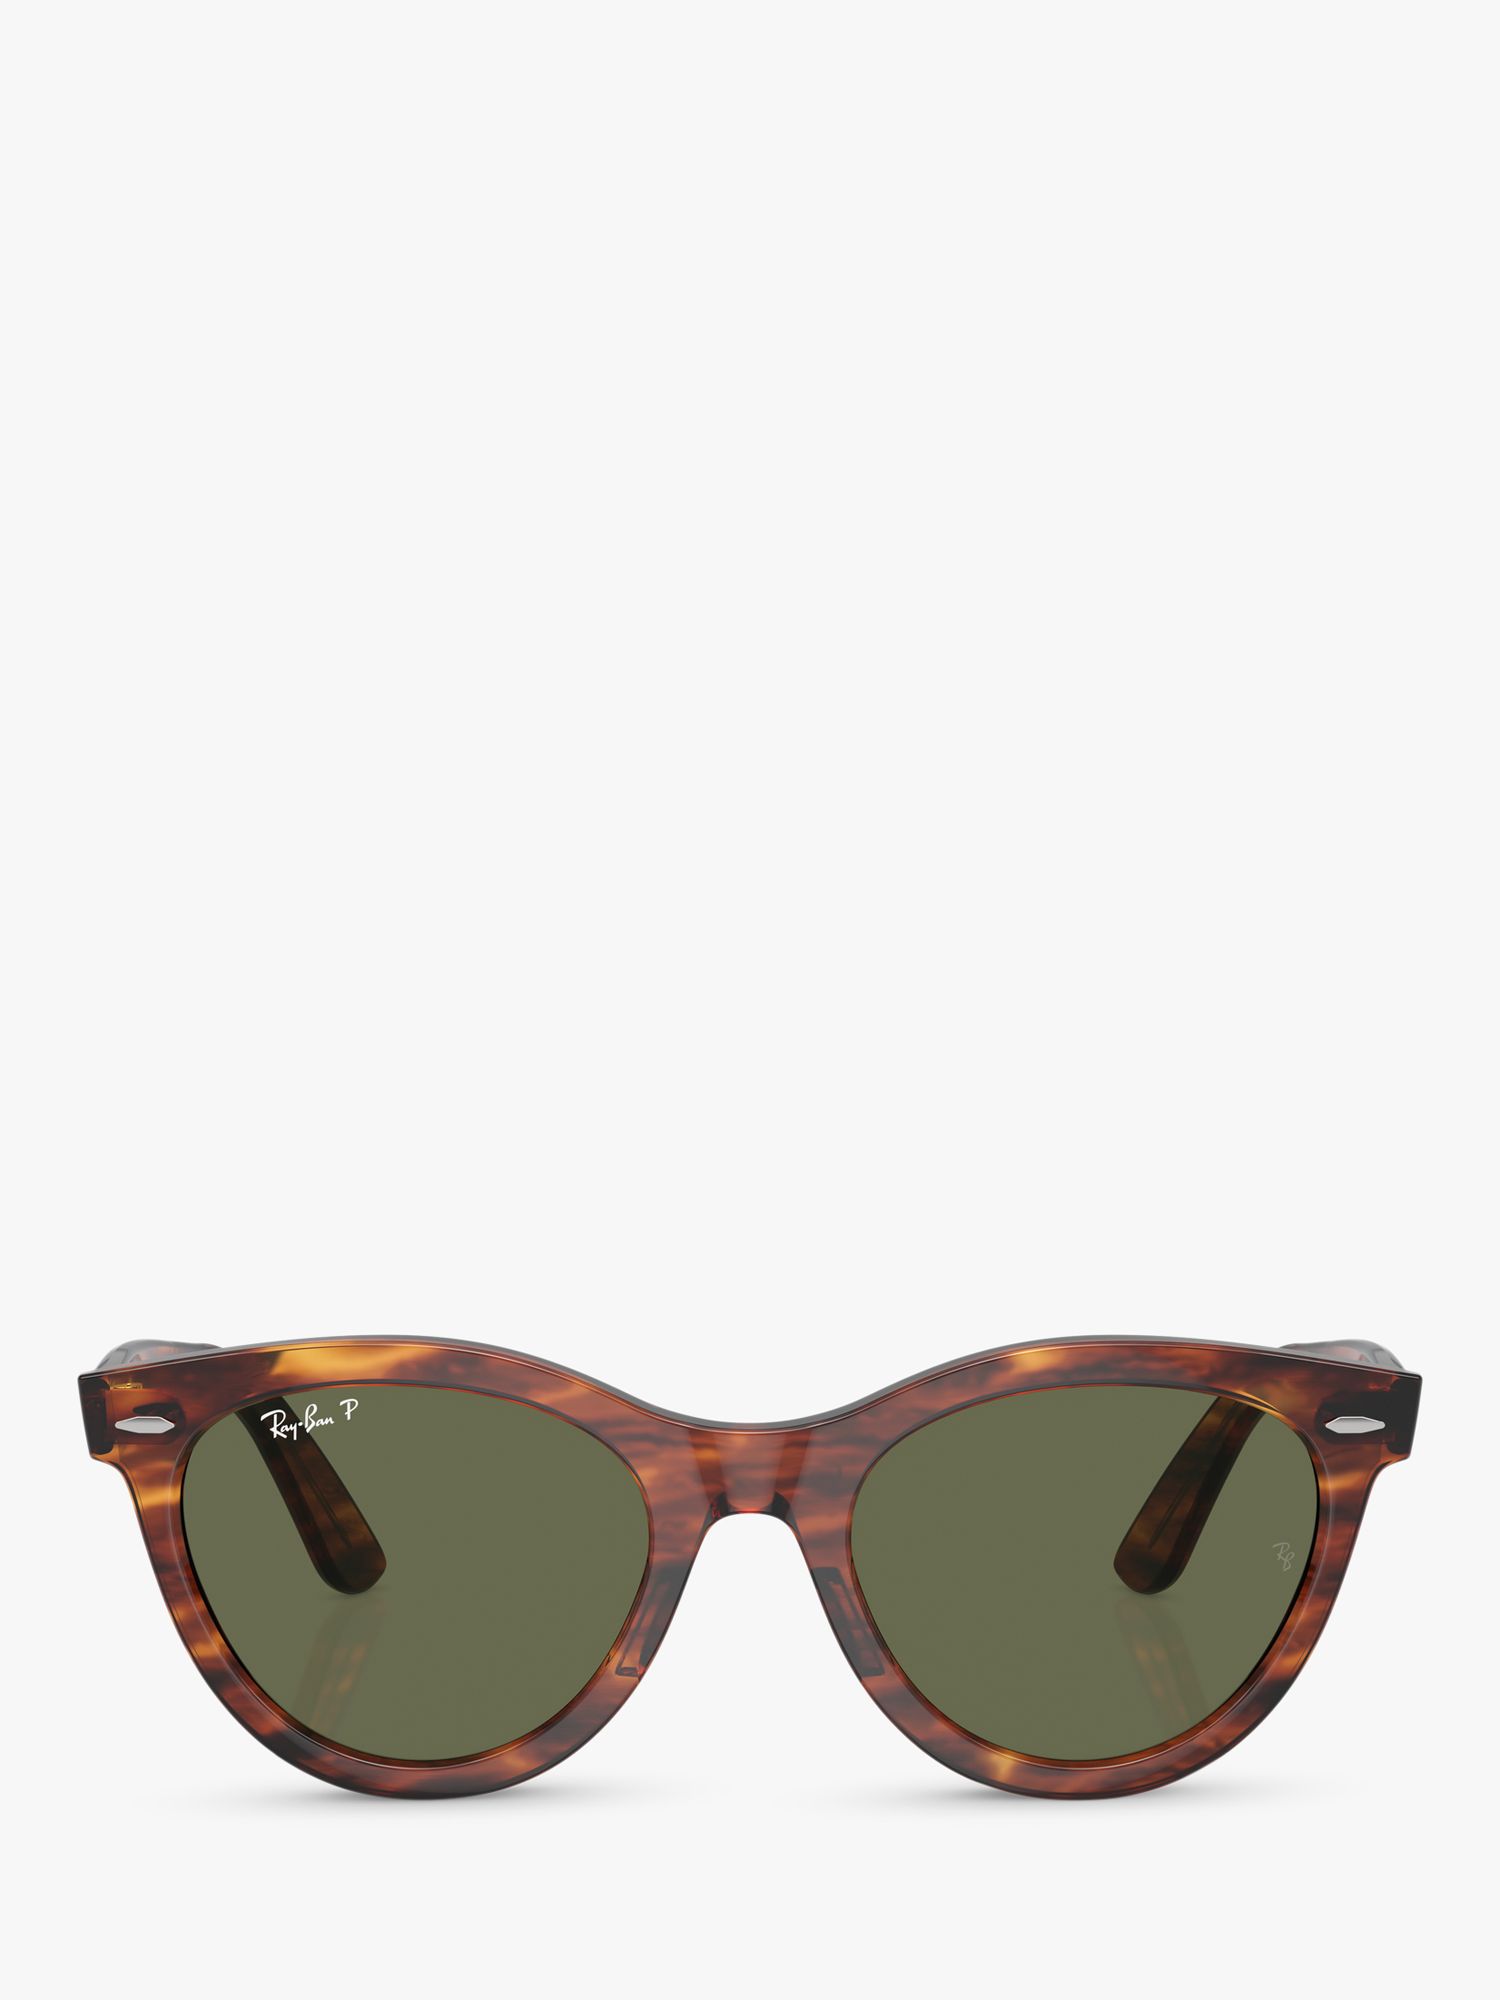 Buy Ray-Ban RB2241 Unisex Polarised Oval Sunglasses, Striped Havana/Green Online at johnlewis.com